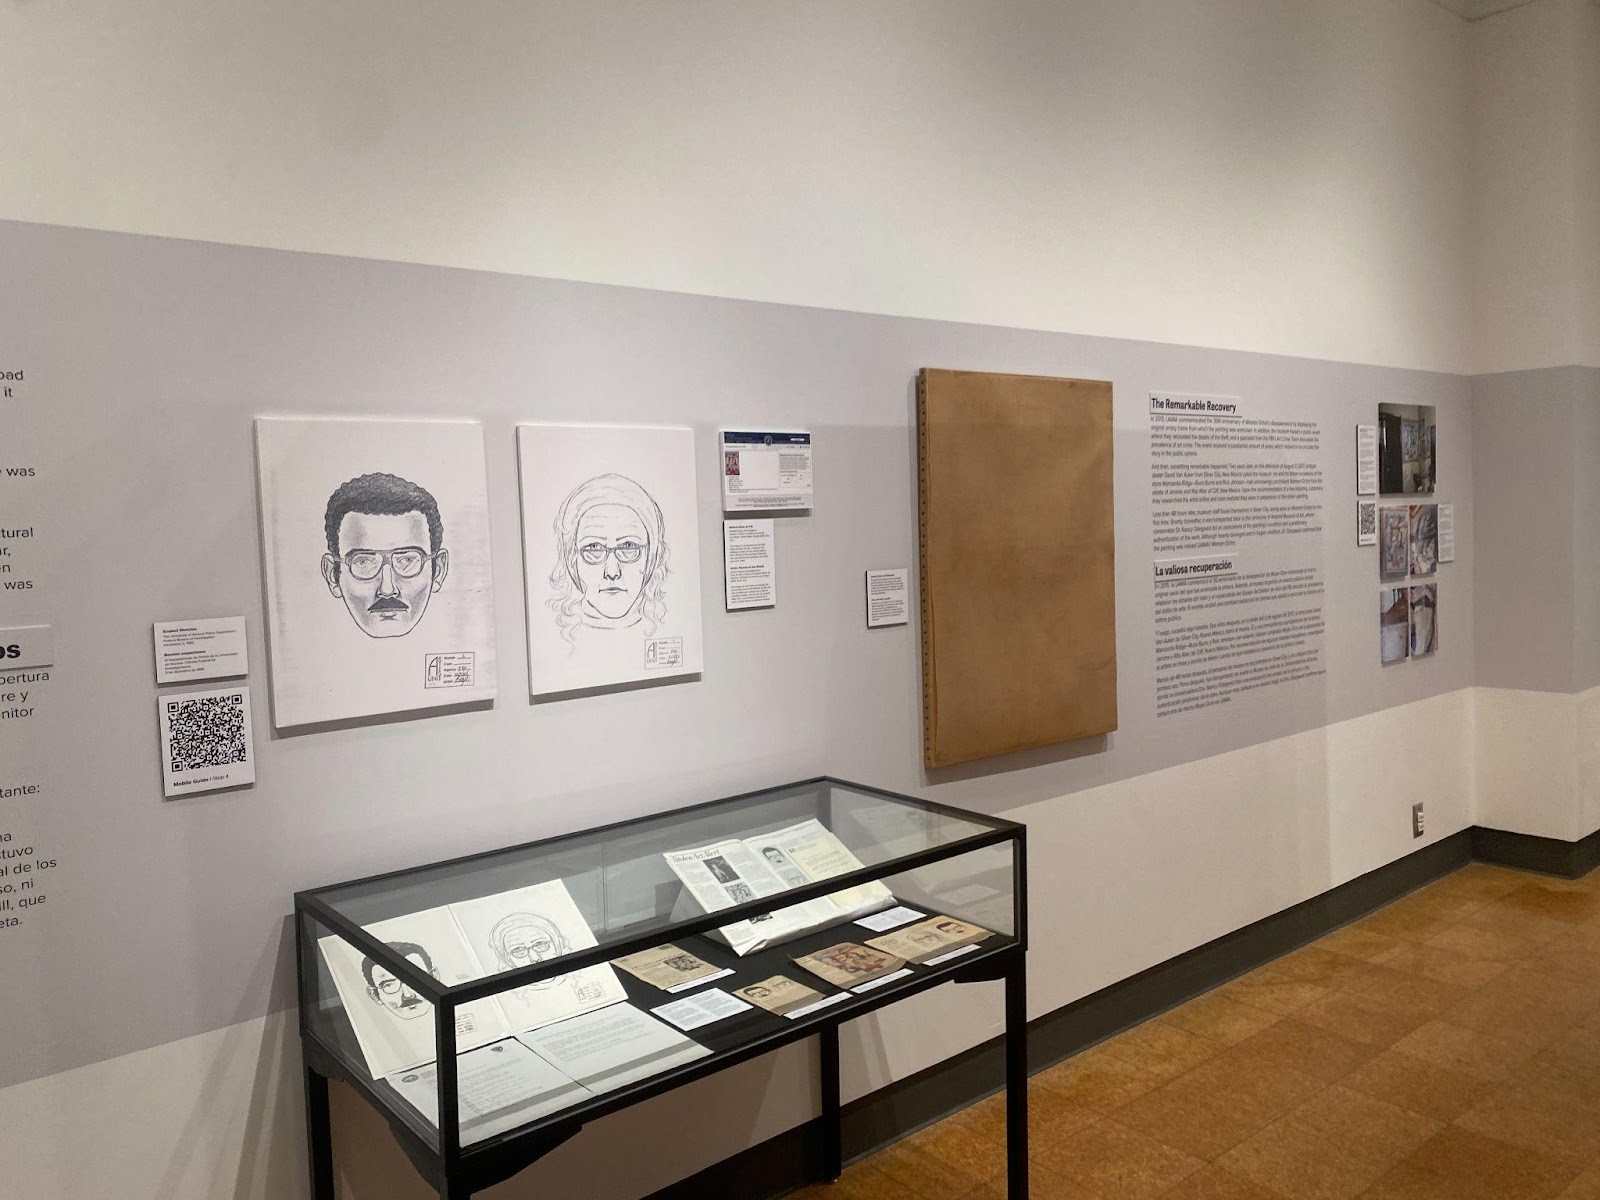 The “Woman-Ochre” exhibition at the UA Museum of Art. Pictured are the composite sketches of the couple thought to have stolen the painting in 1985.